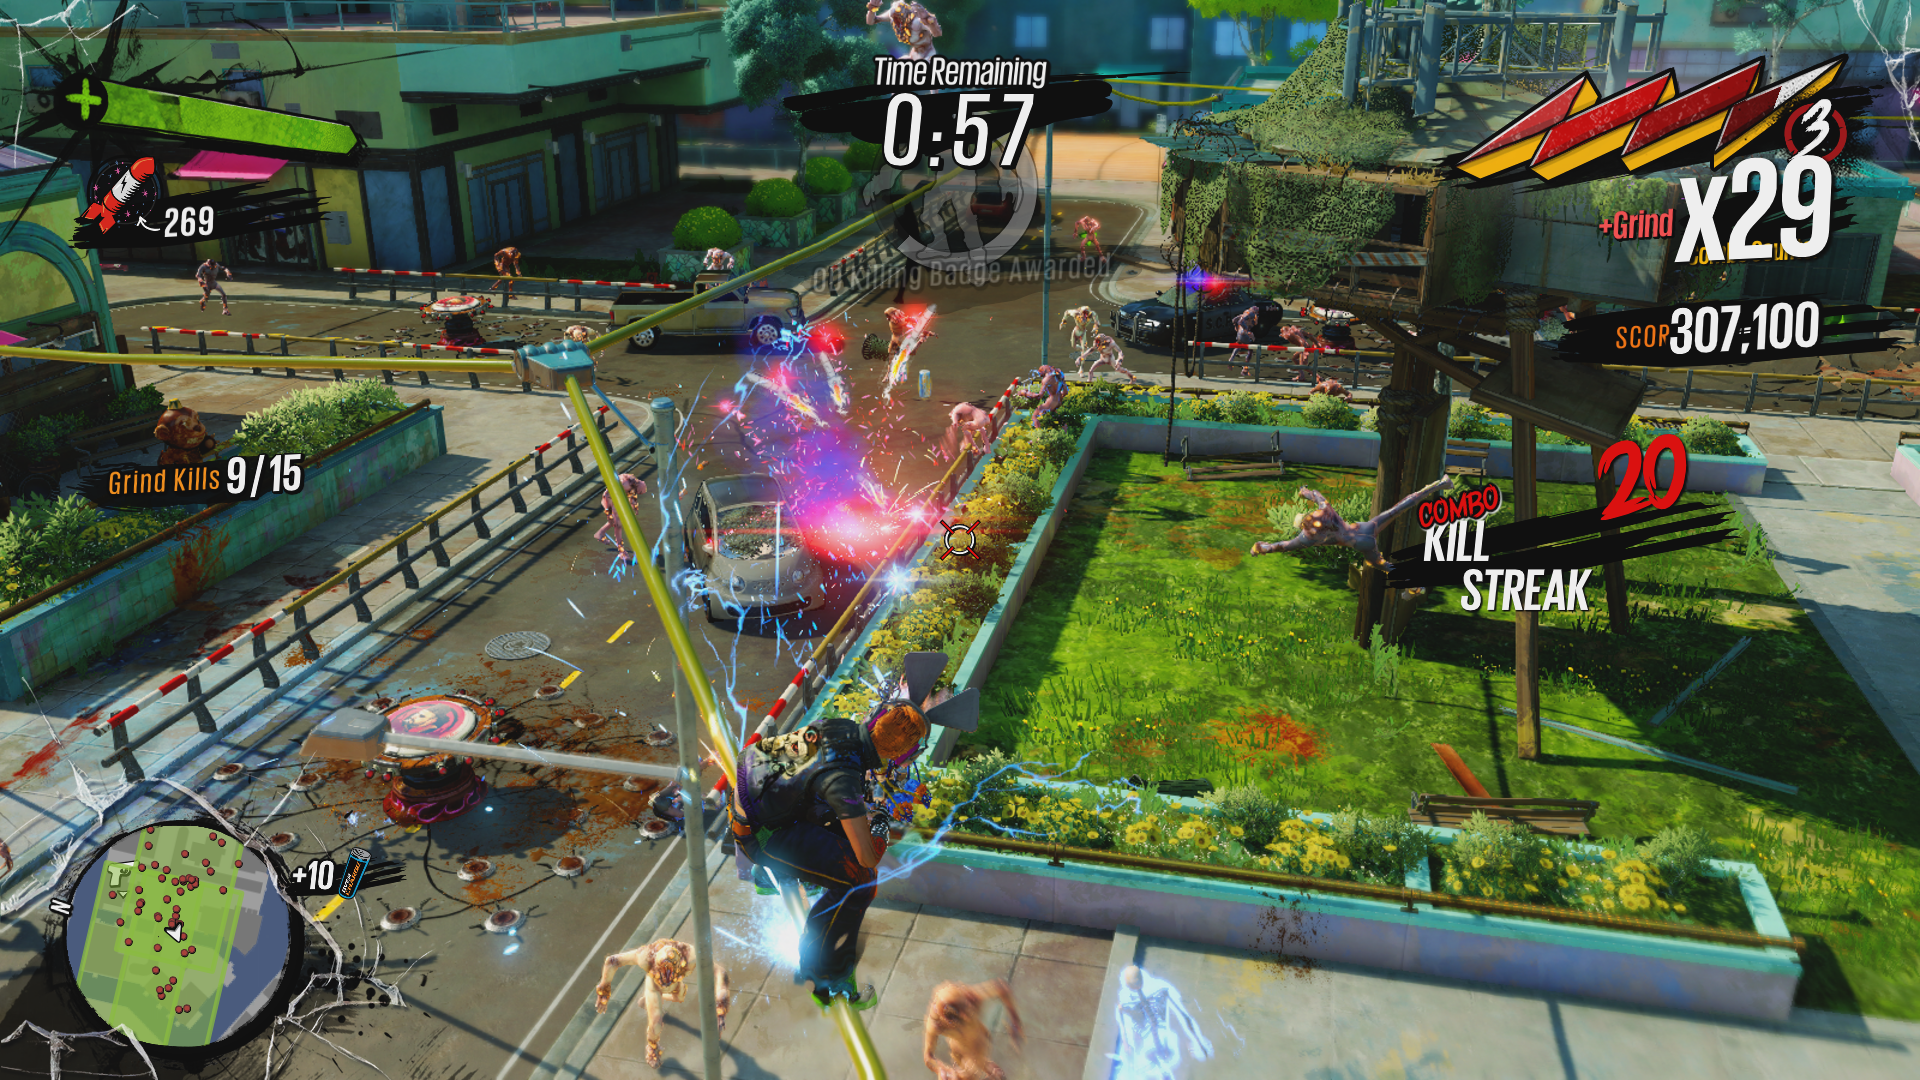 Sunset Overdrive: Gameplay and Ending! - nomisaurus on Twitch